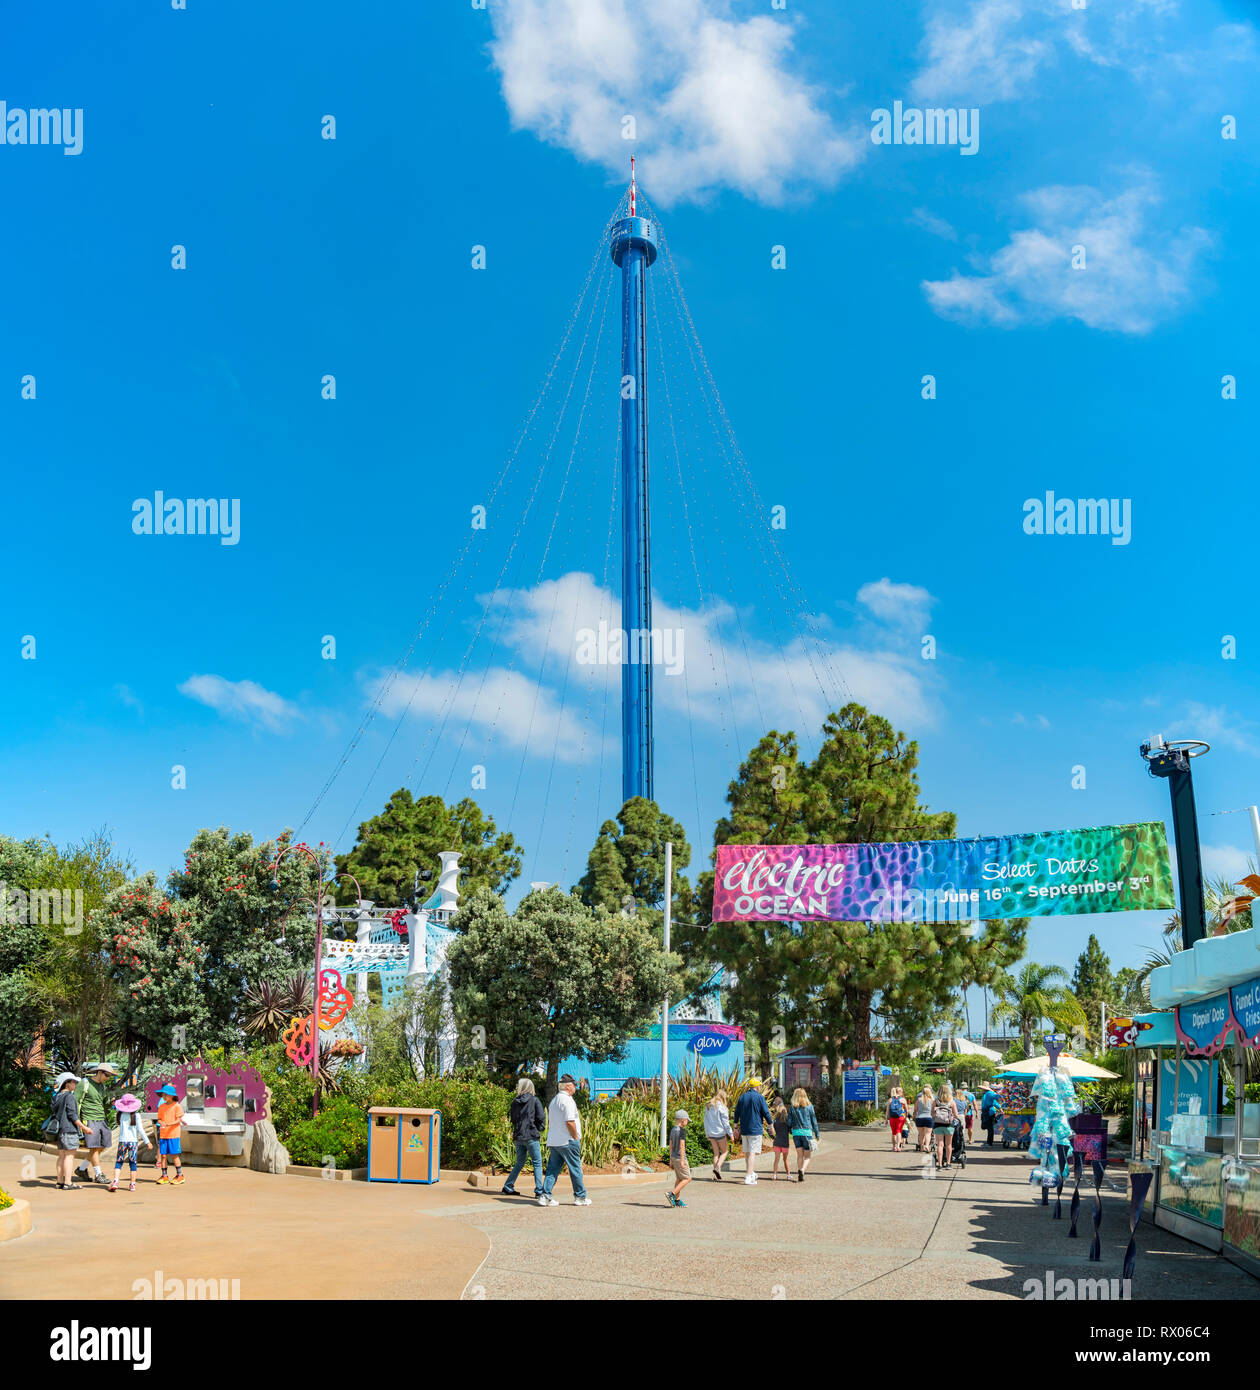 San Diego, JUN 27: Looking up the skytower in the famous SeaWorld on JUN 27, 2018 at San Diego, California Stock Photo